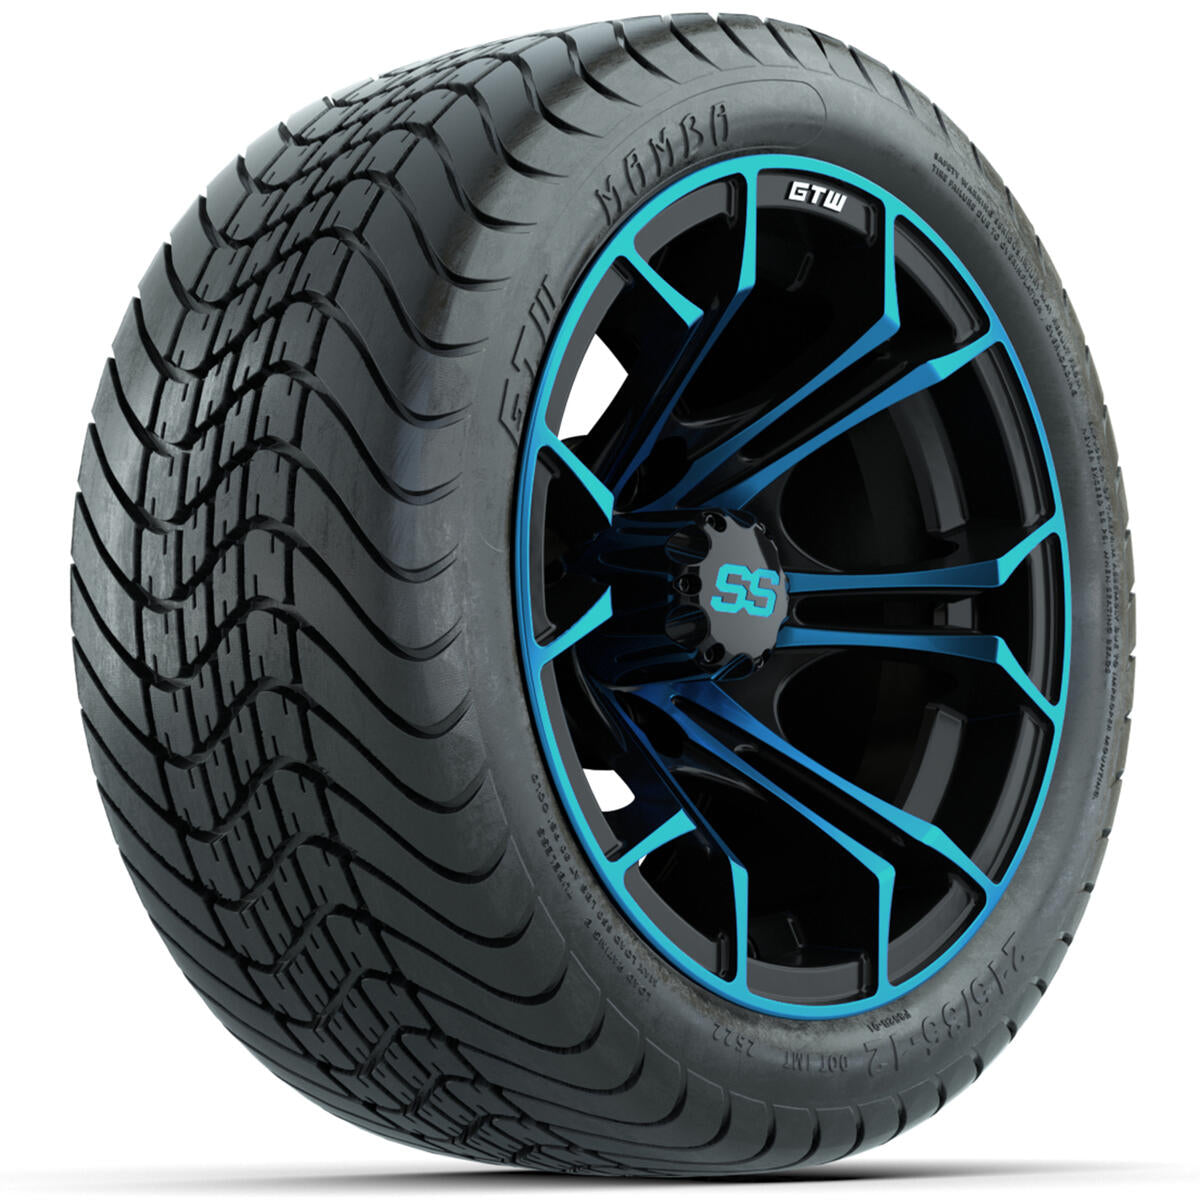 Set of 4 12"in GTW Spyder Wheels with 215/35-12"GTW Mamba Street Tires A19-662